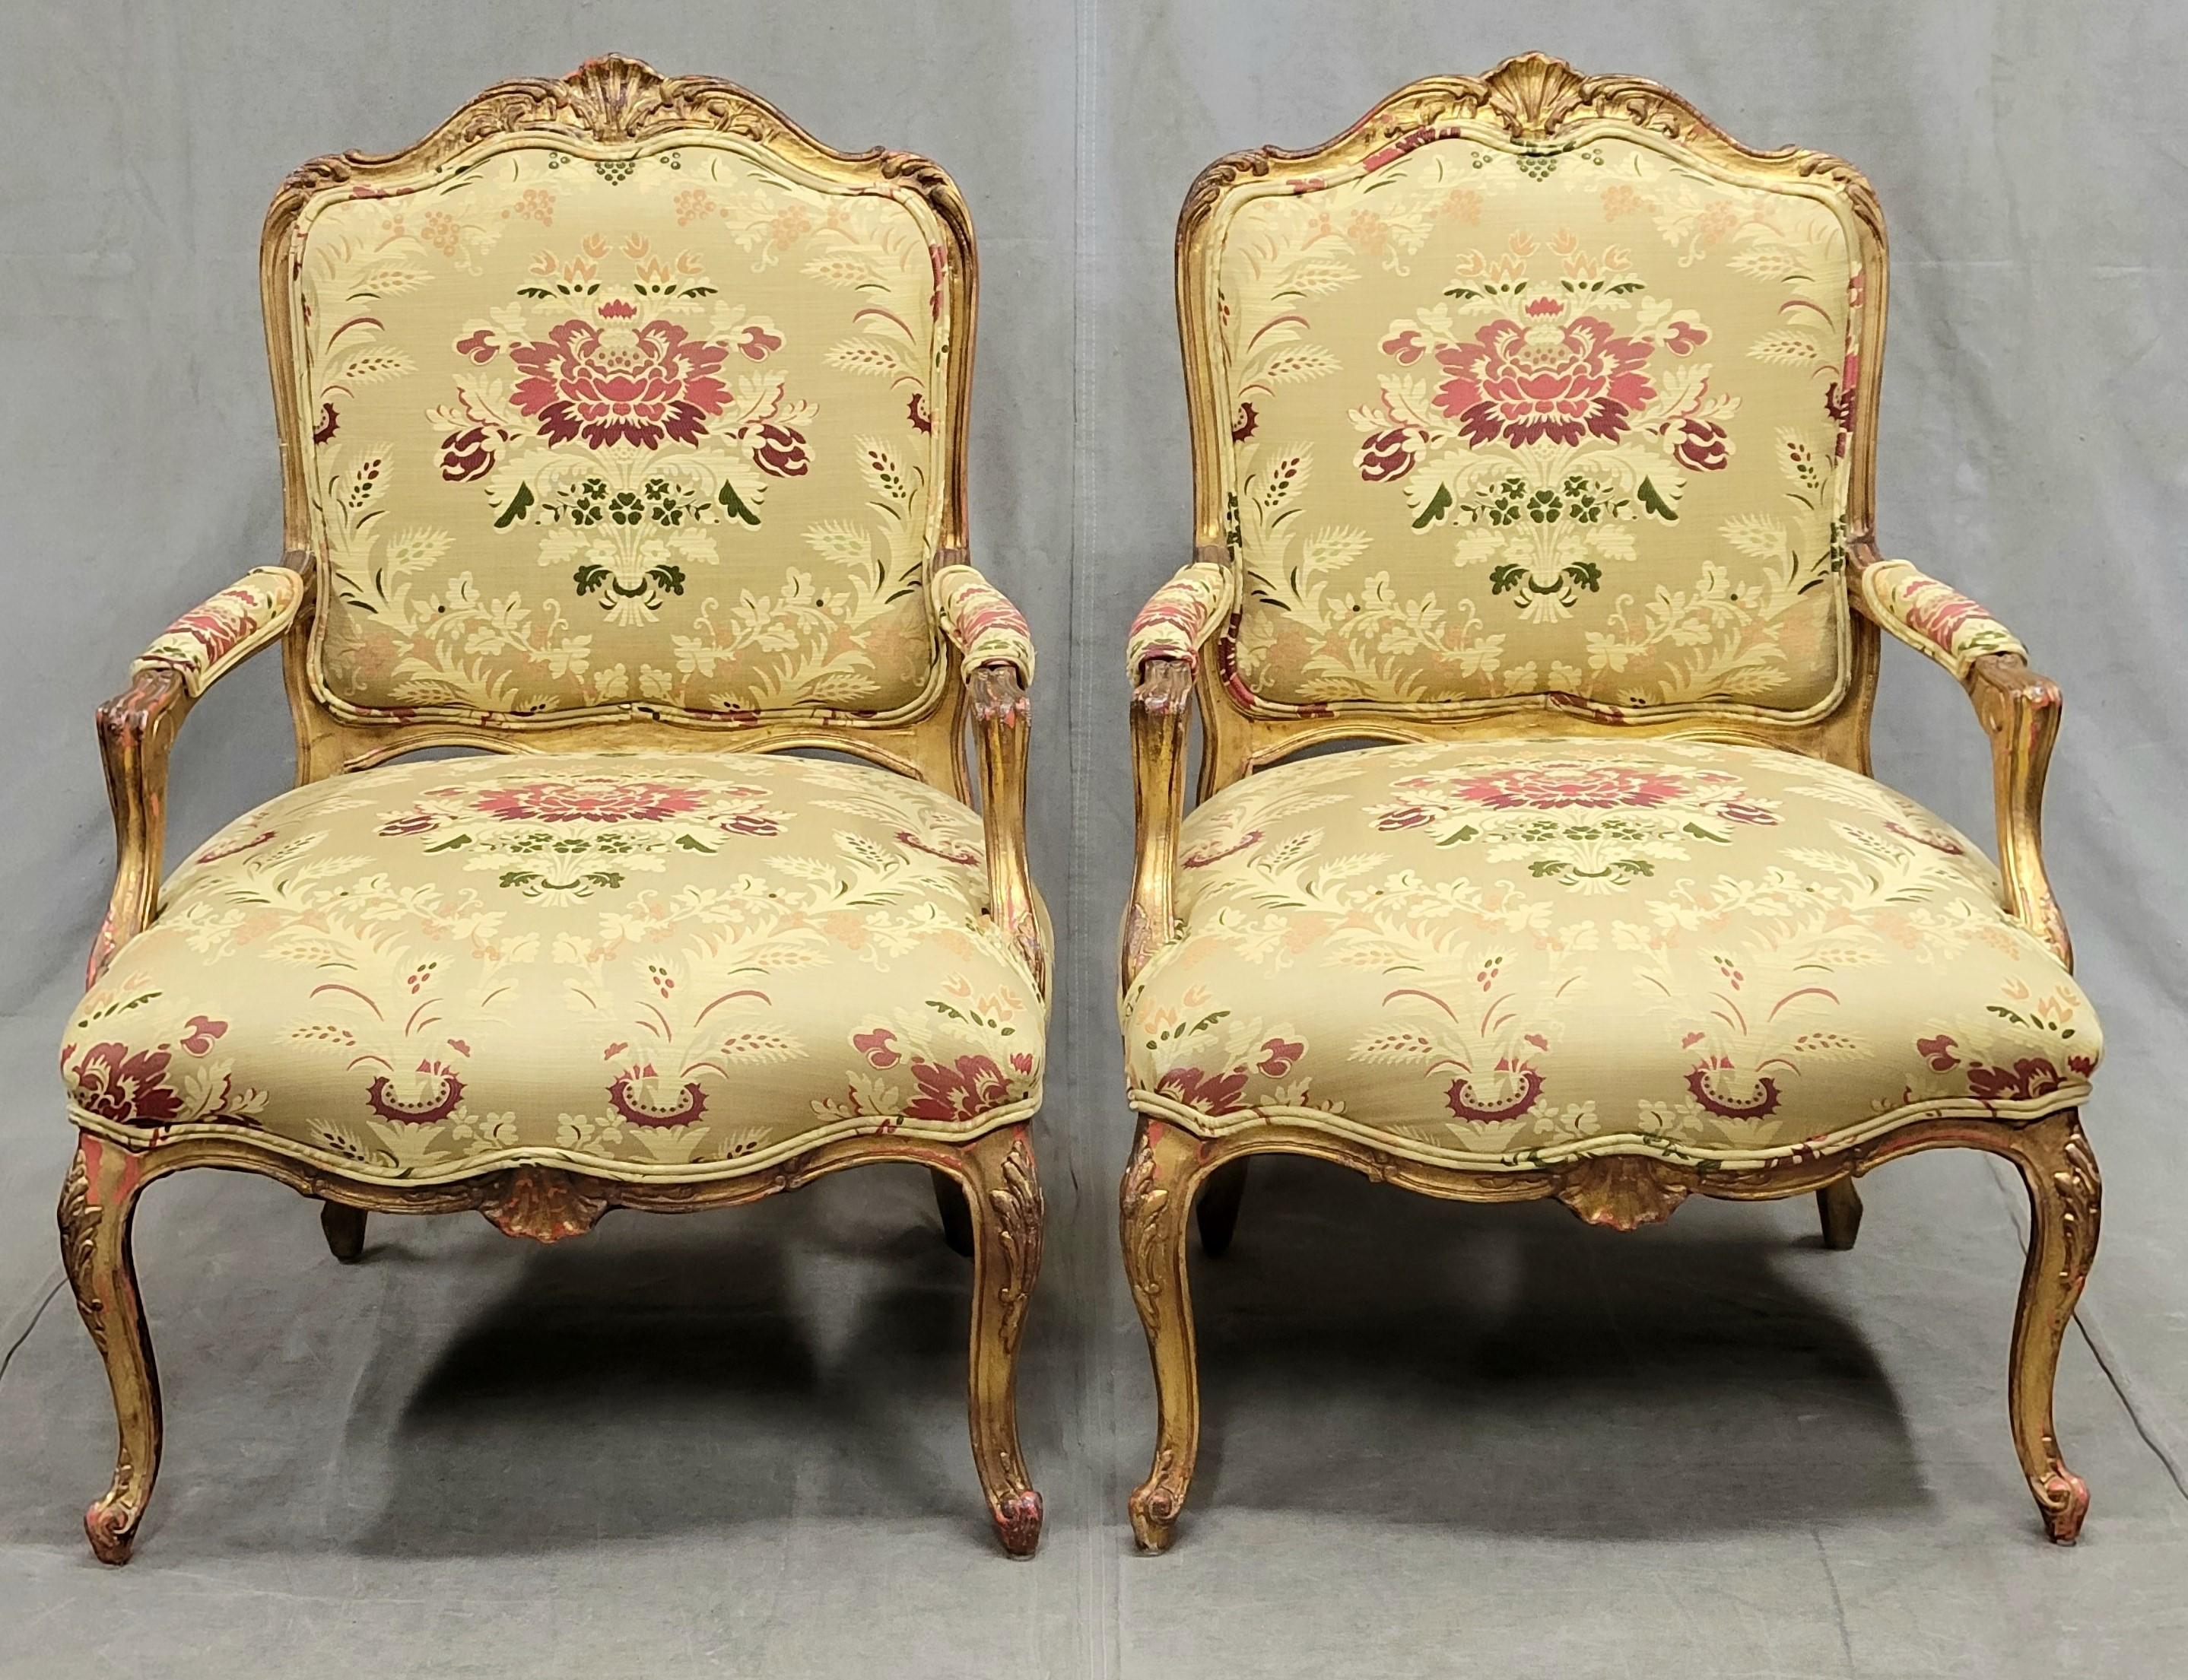 An opulent pair of French bergere chairs with gold leaf wood frames and new designer damask upholstery in shades of pale gold, cranberry red, and moss green. Seats are tight and chair frames are strong. The pair create an elegant seating area and